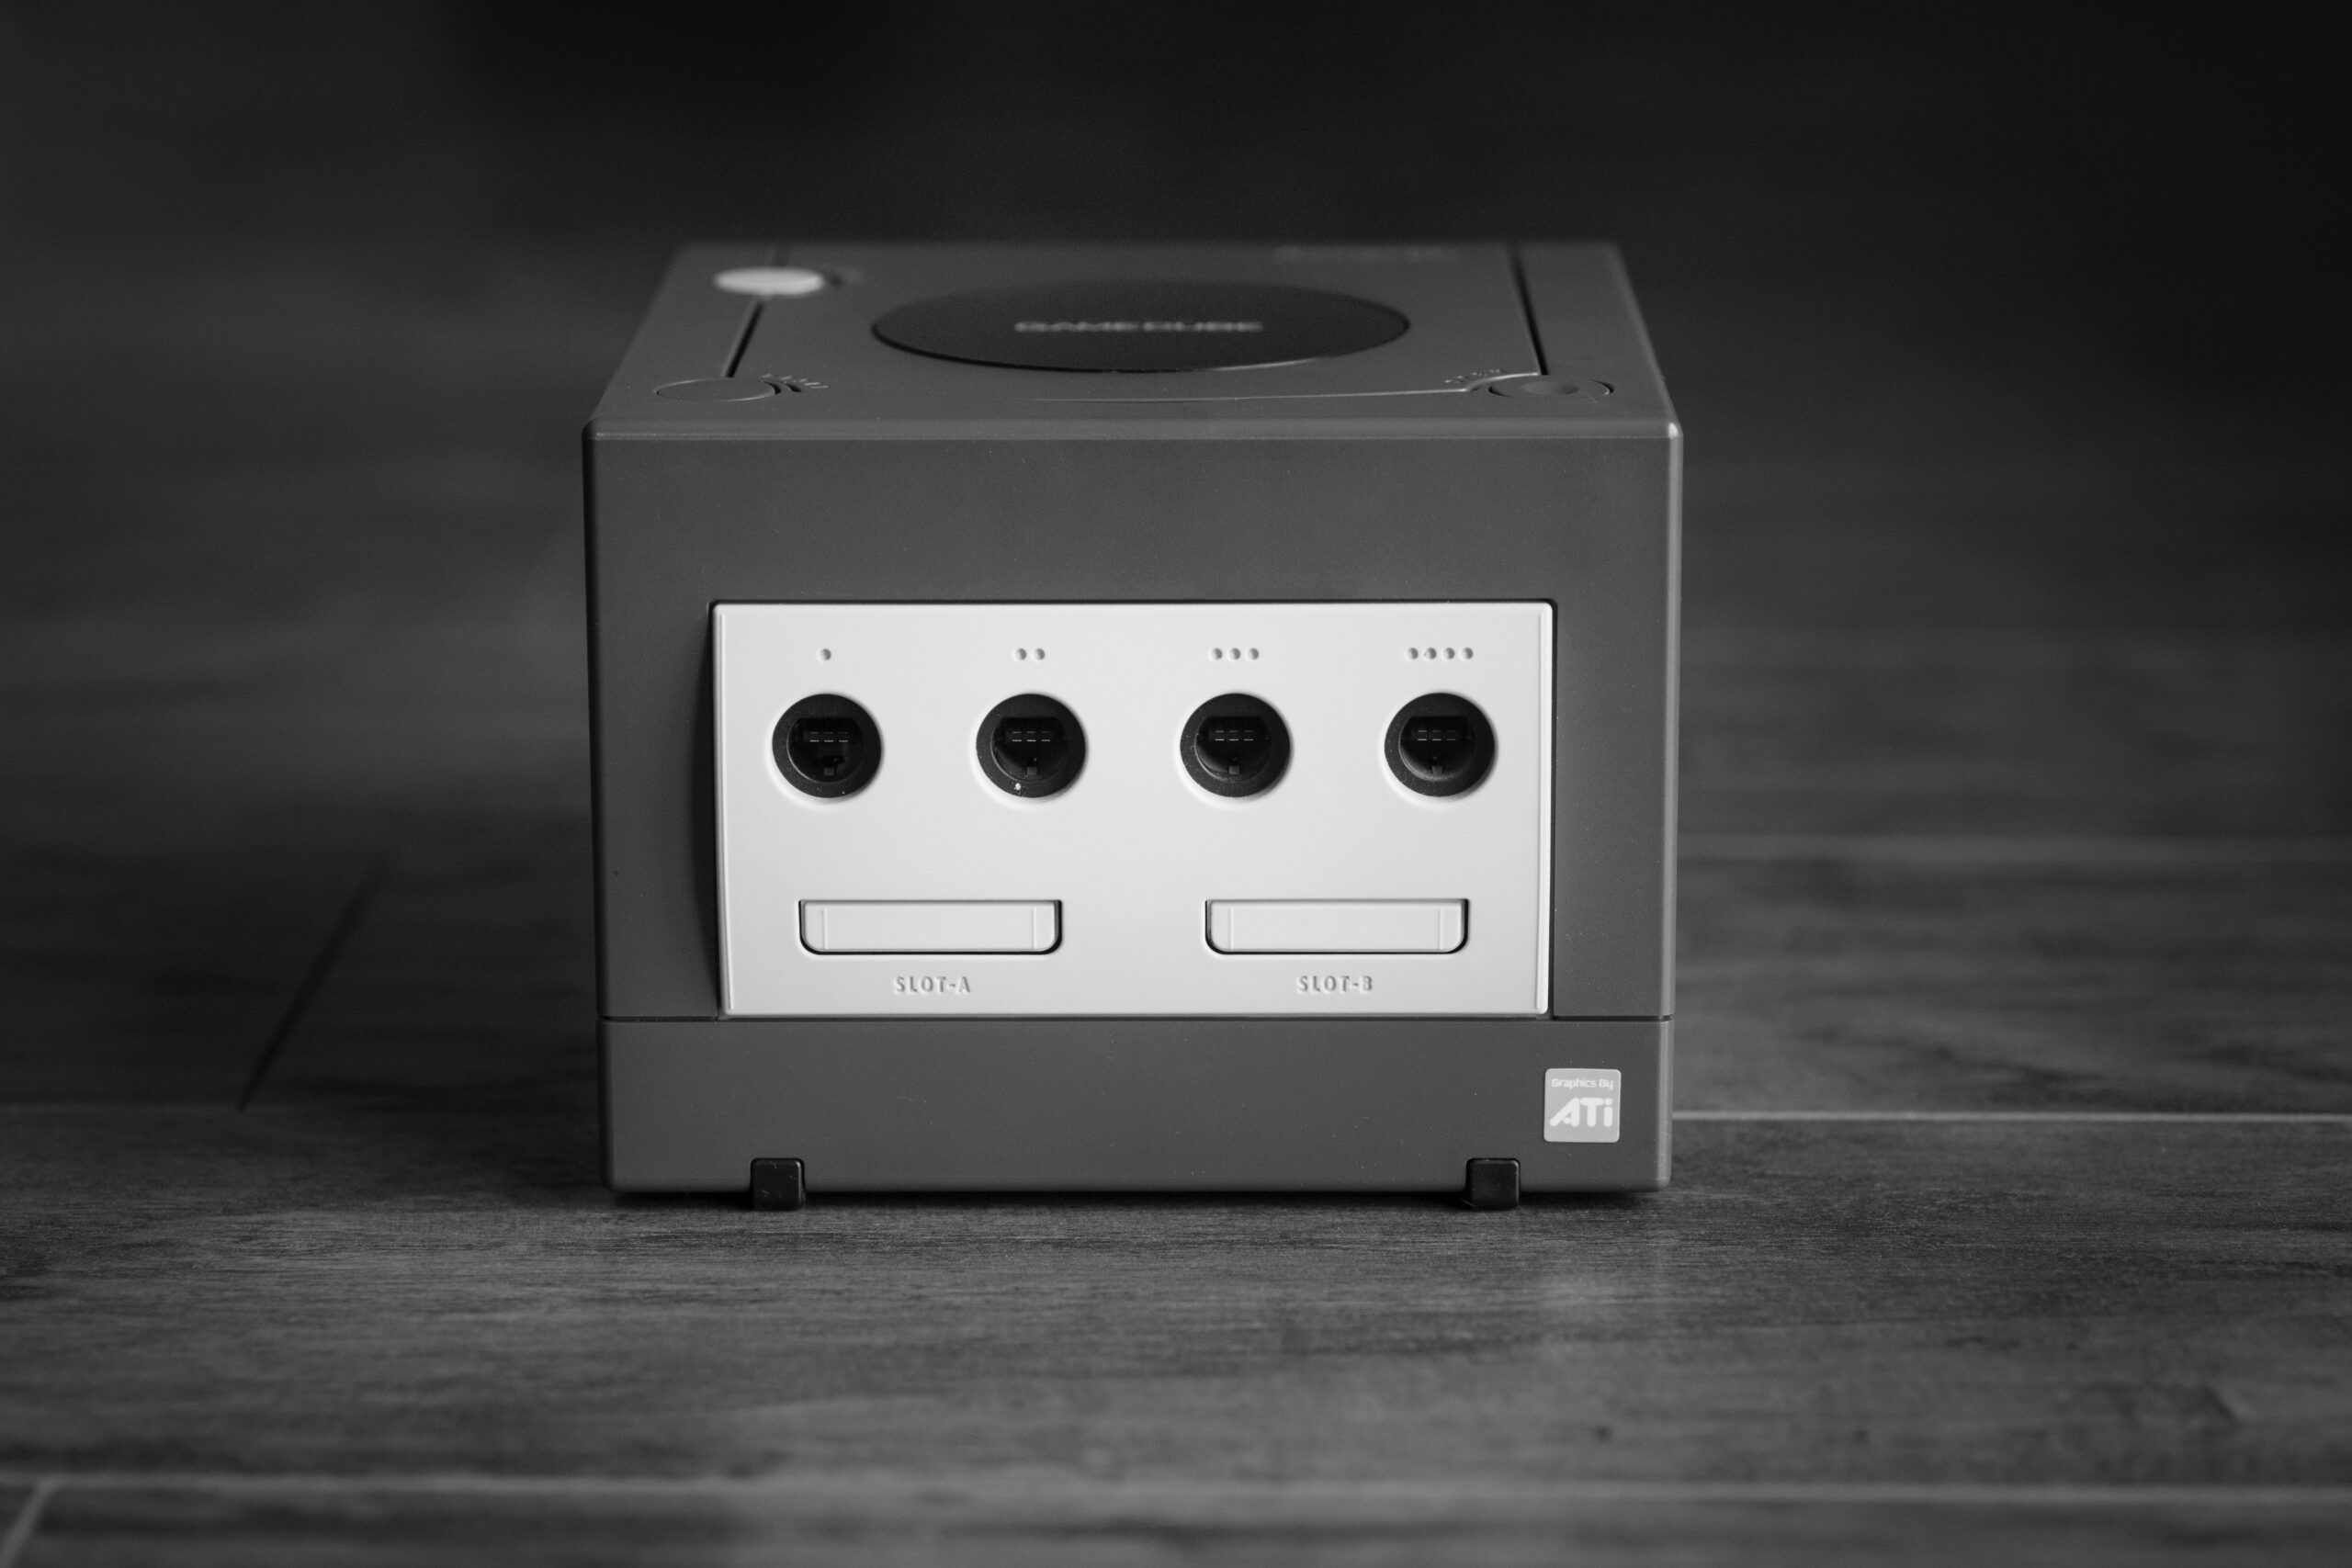 GameCube to Nintendo Switch 2? (And 6 Other Console Release Theories)